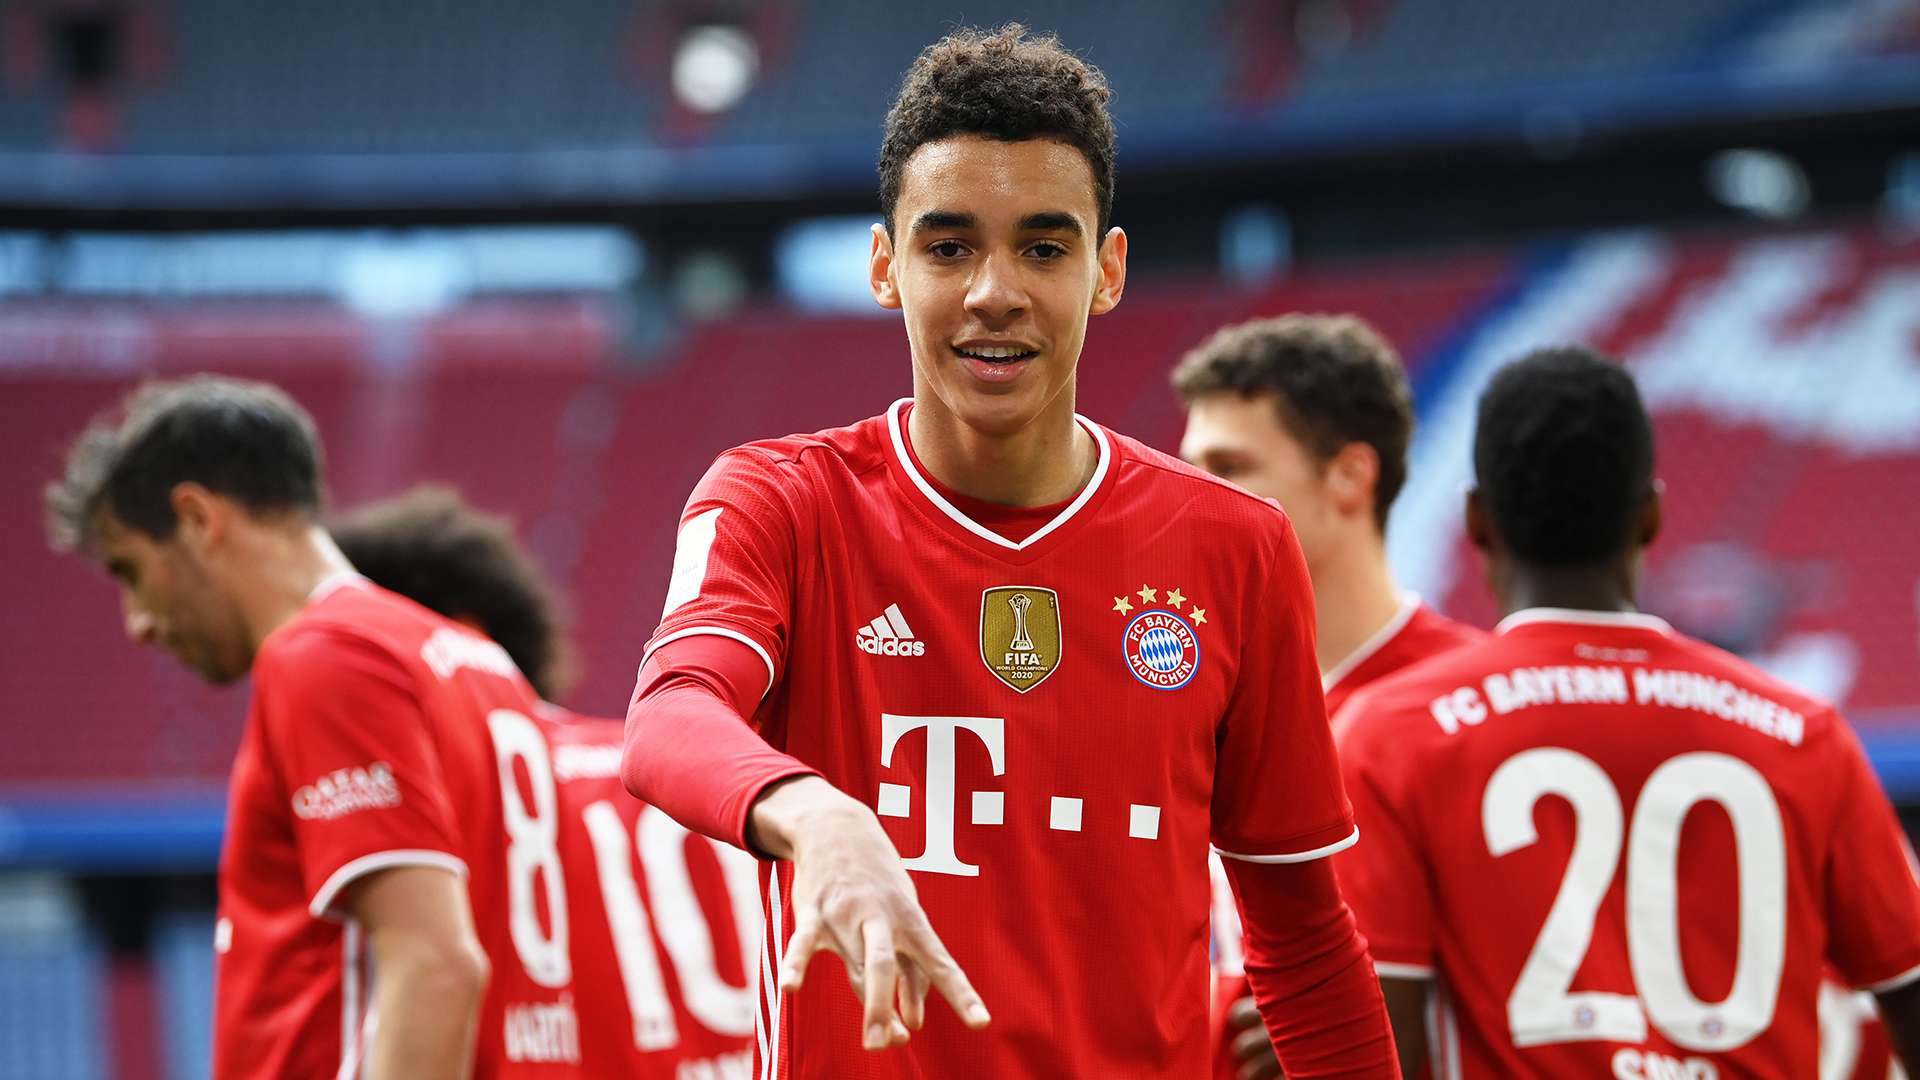 He reminds me of myself, which is why I like him!' jokes about why Bayern Munich starlet Musiala is so good